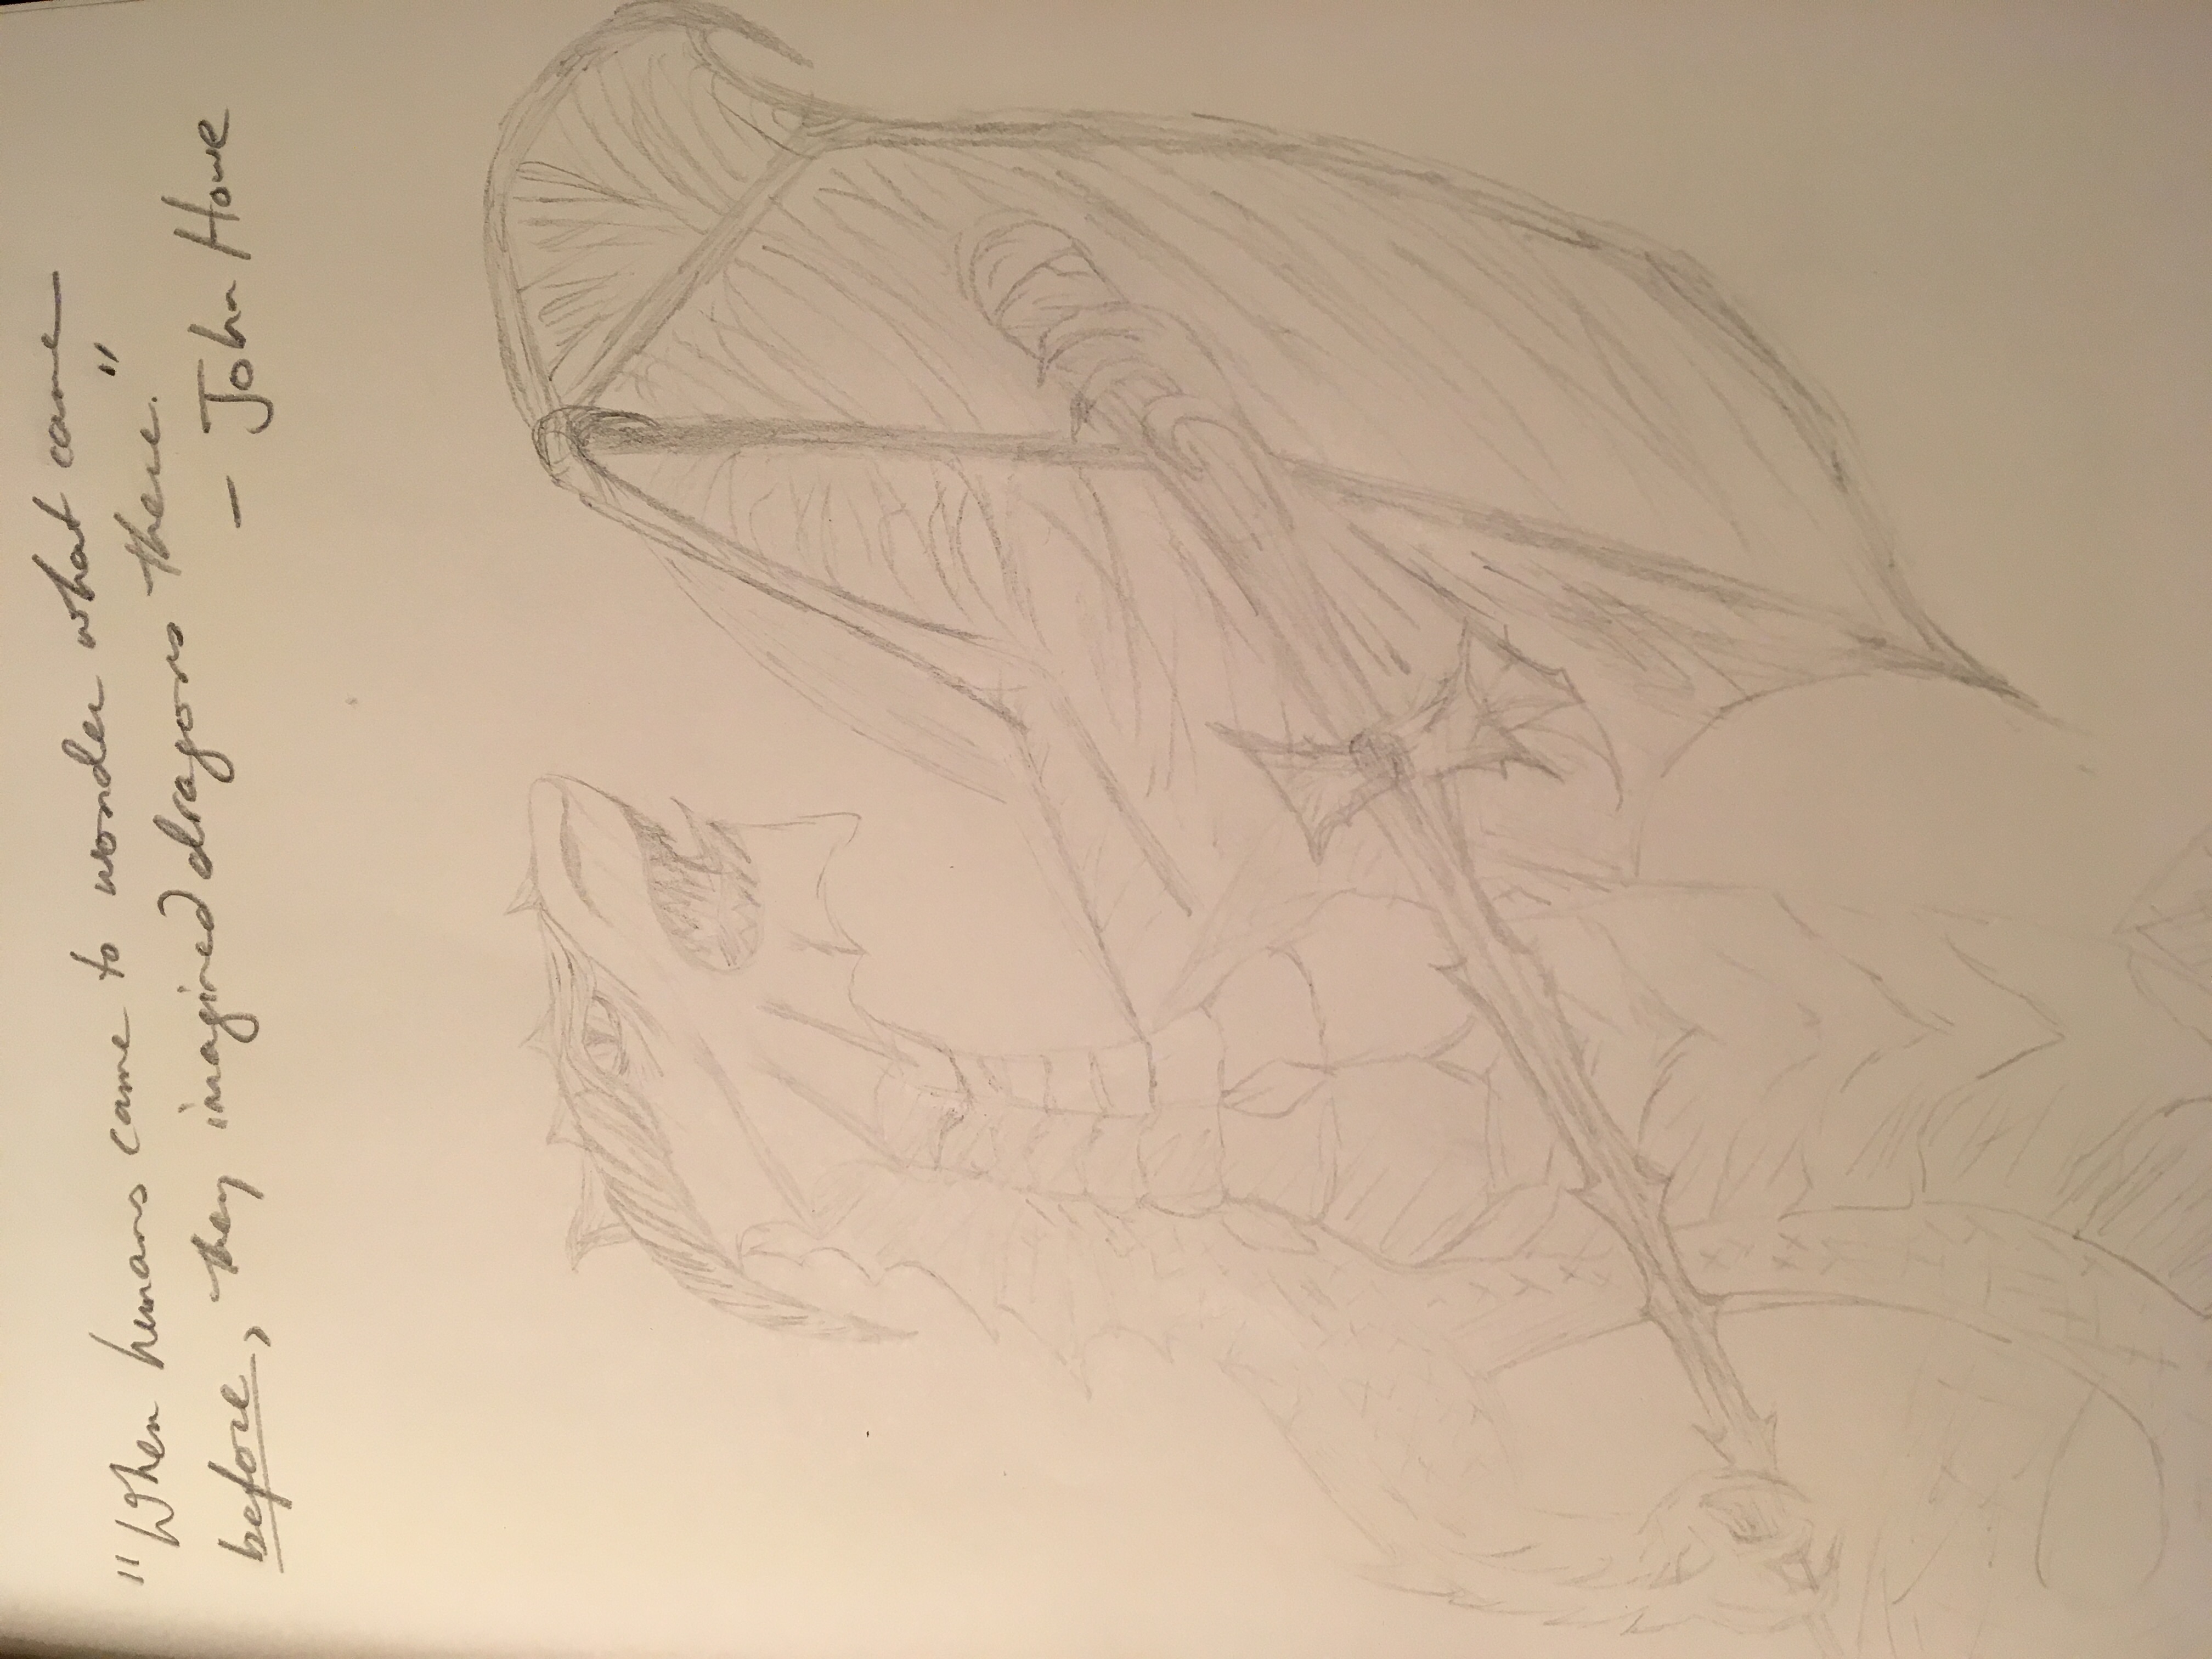 Dragon holding a sword drawn and pencil one wing missing